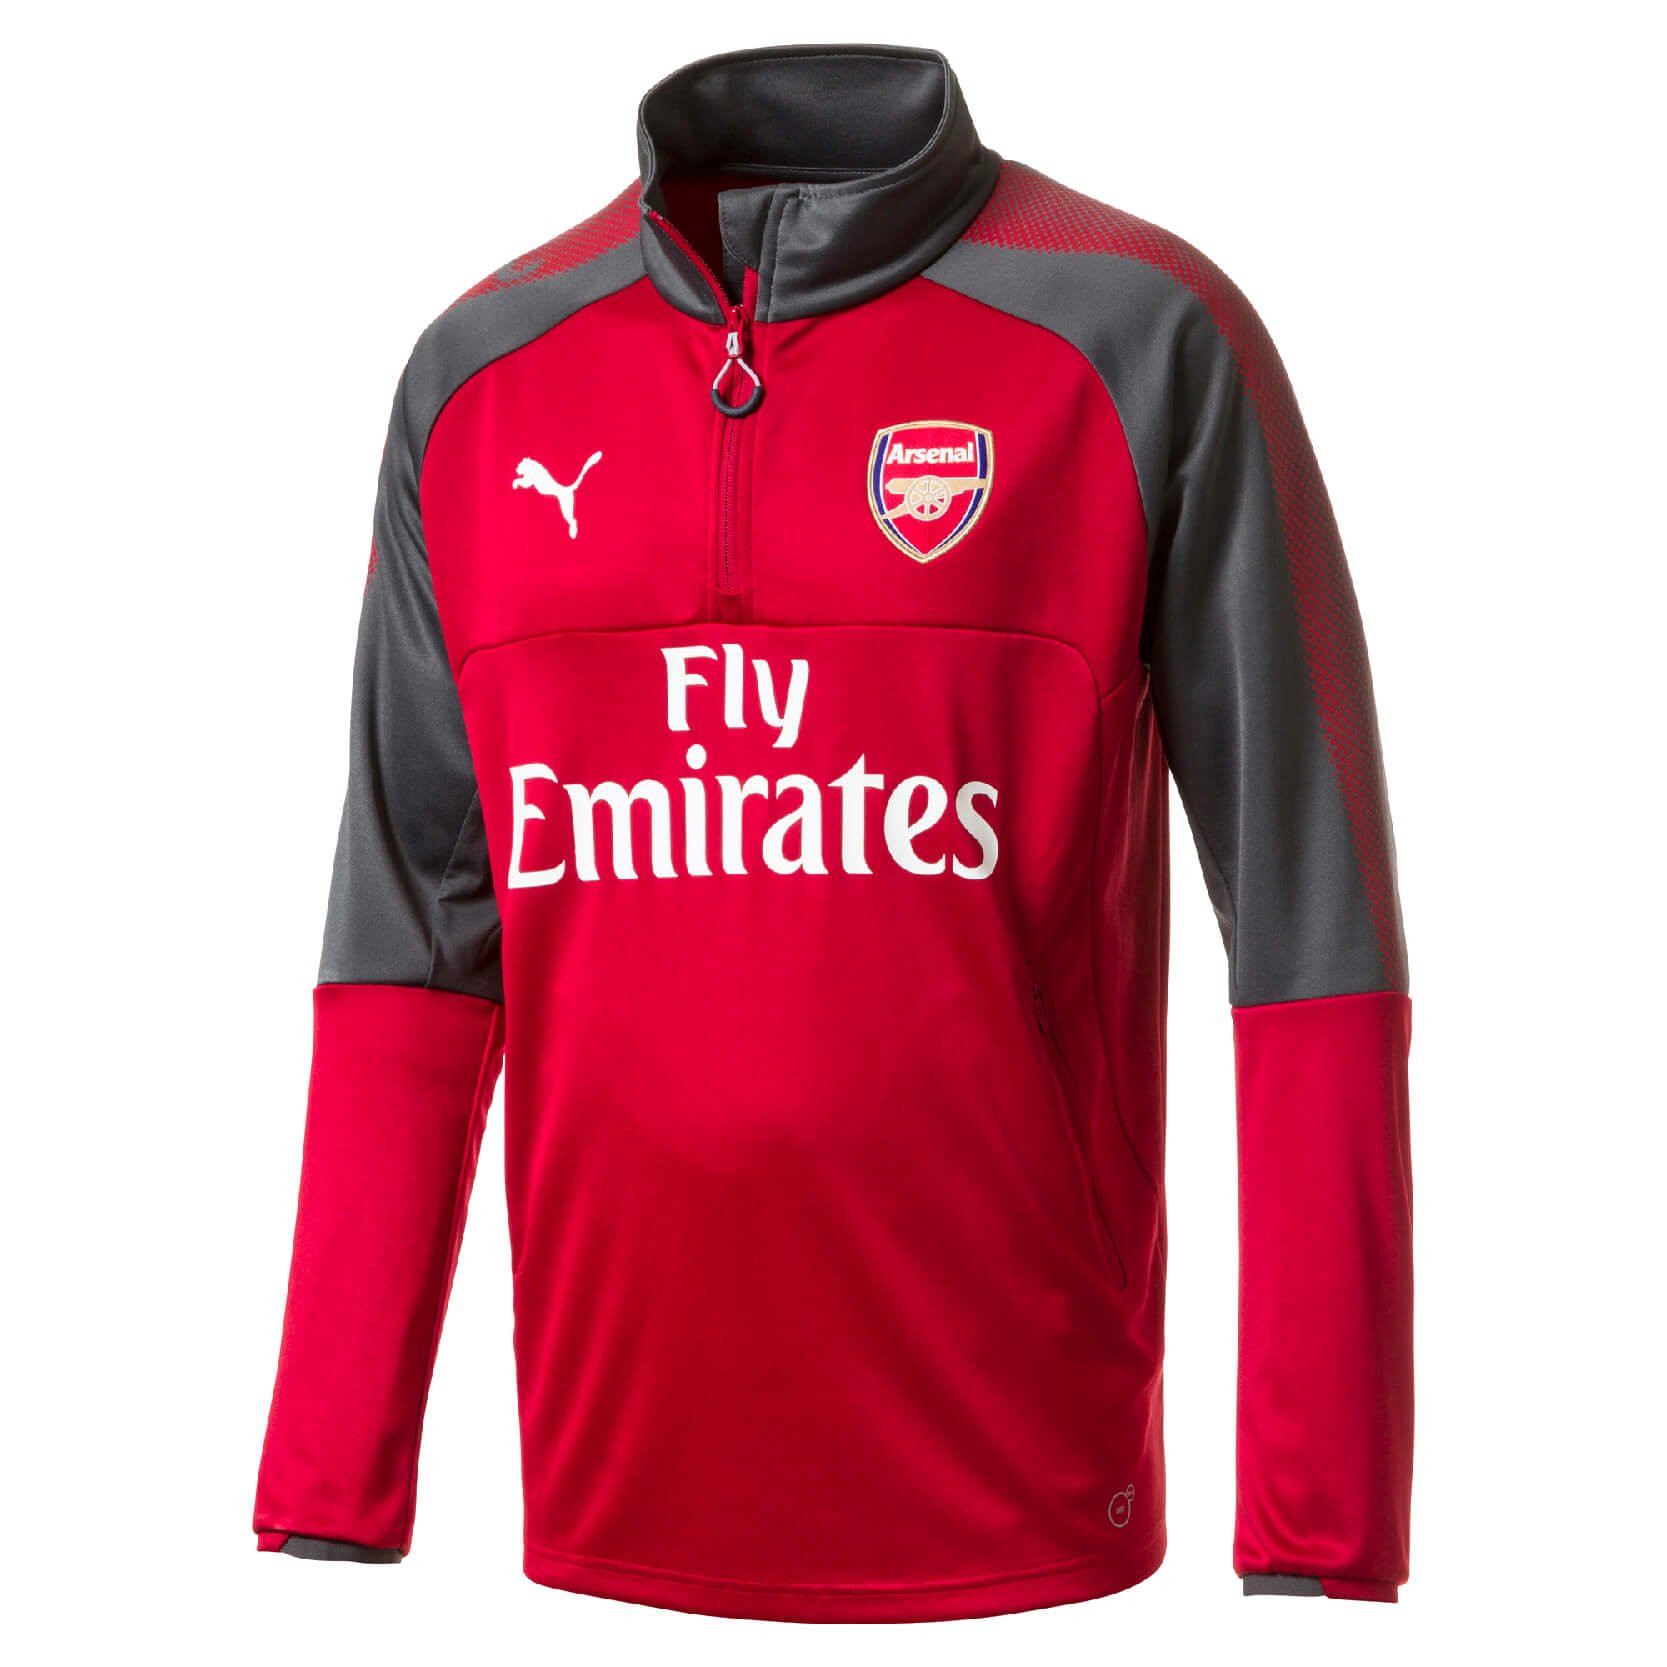 PUMA ARSENAL TRG TOP ROUGE 2017/2018